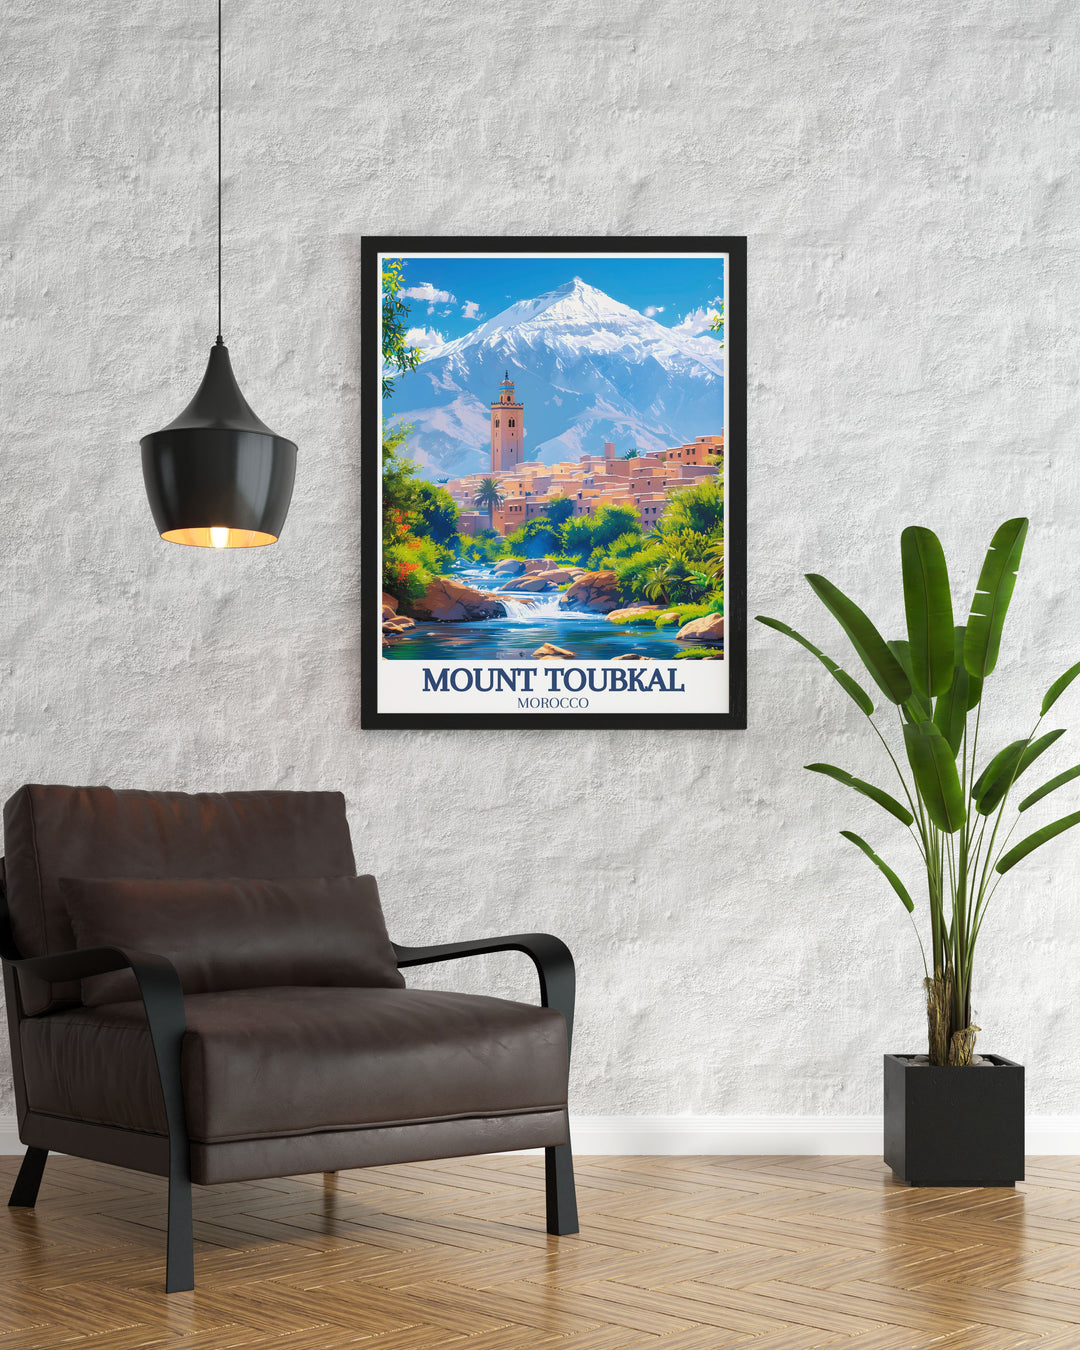 Beautiful High Atlas mountains wall art capturing the serene beauty and rugged terrain of Moroccos iconic region perfect for home decor or as a unique Moroccan gift for friends and family who appreciate North African landscapes.